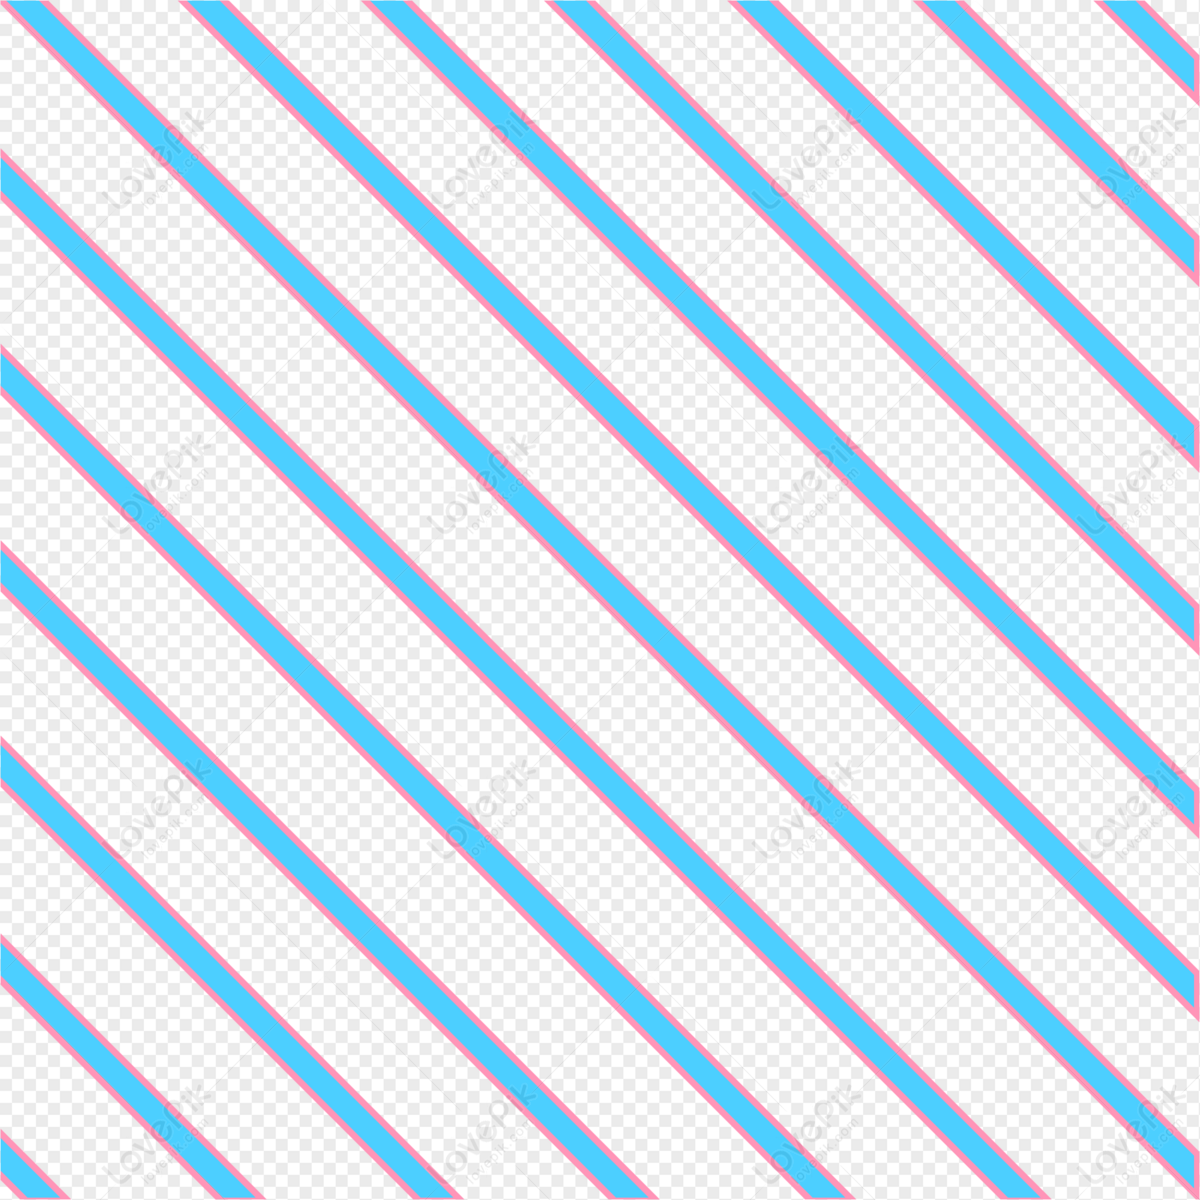 Stripes PNG Images With Transparent Background